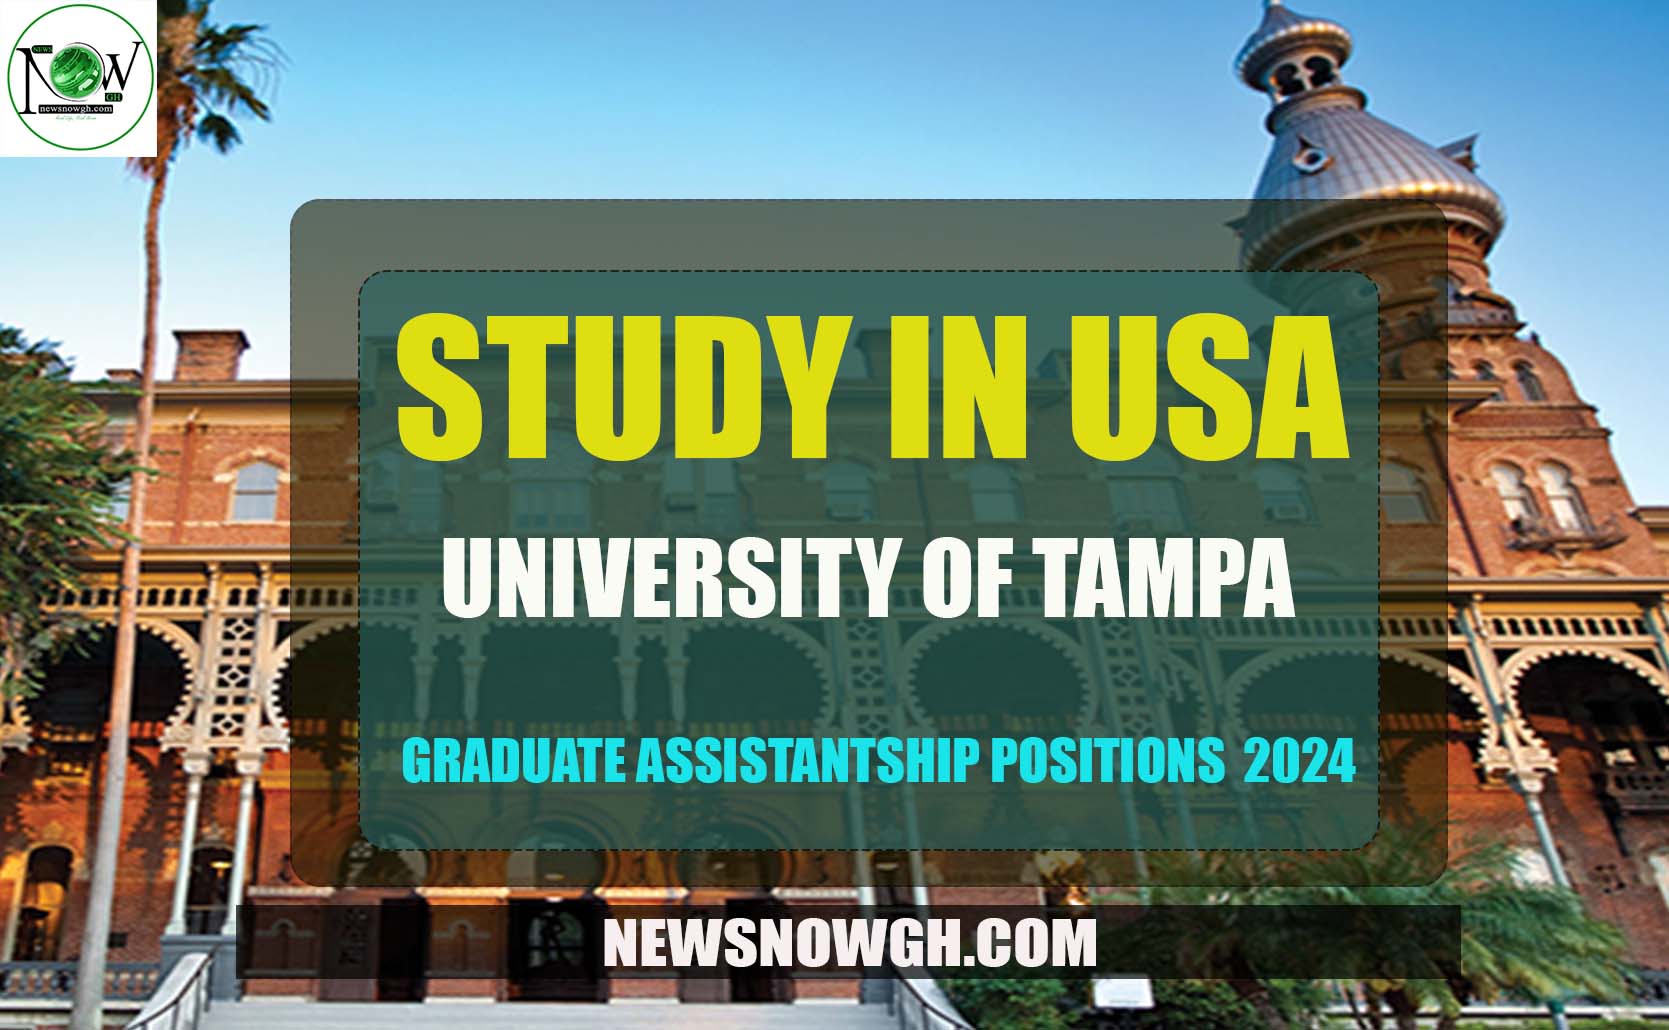 Study In USA University of Tampa Graduate Assistantship positions 2024